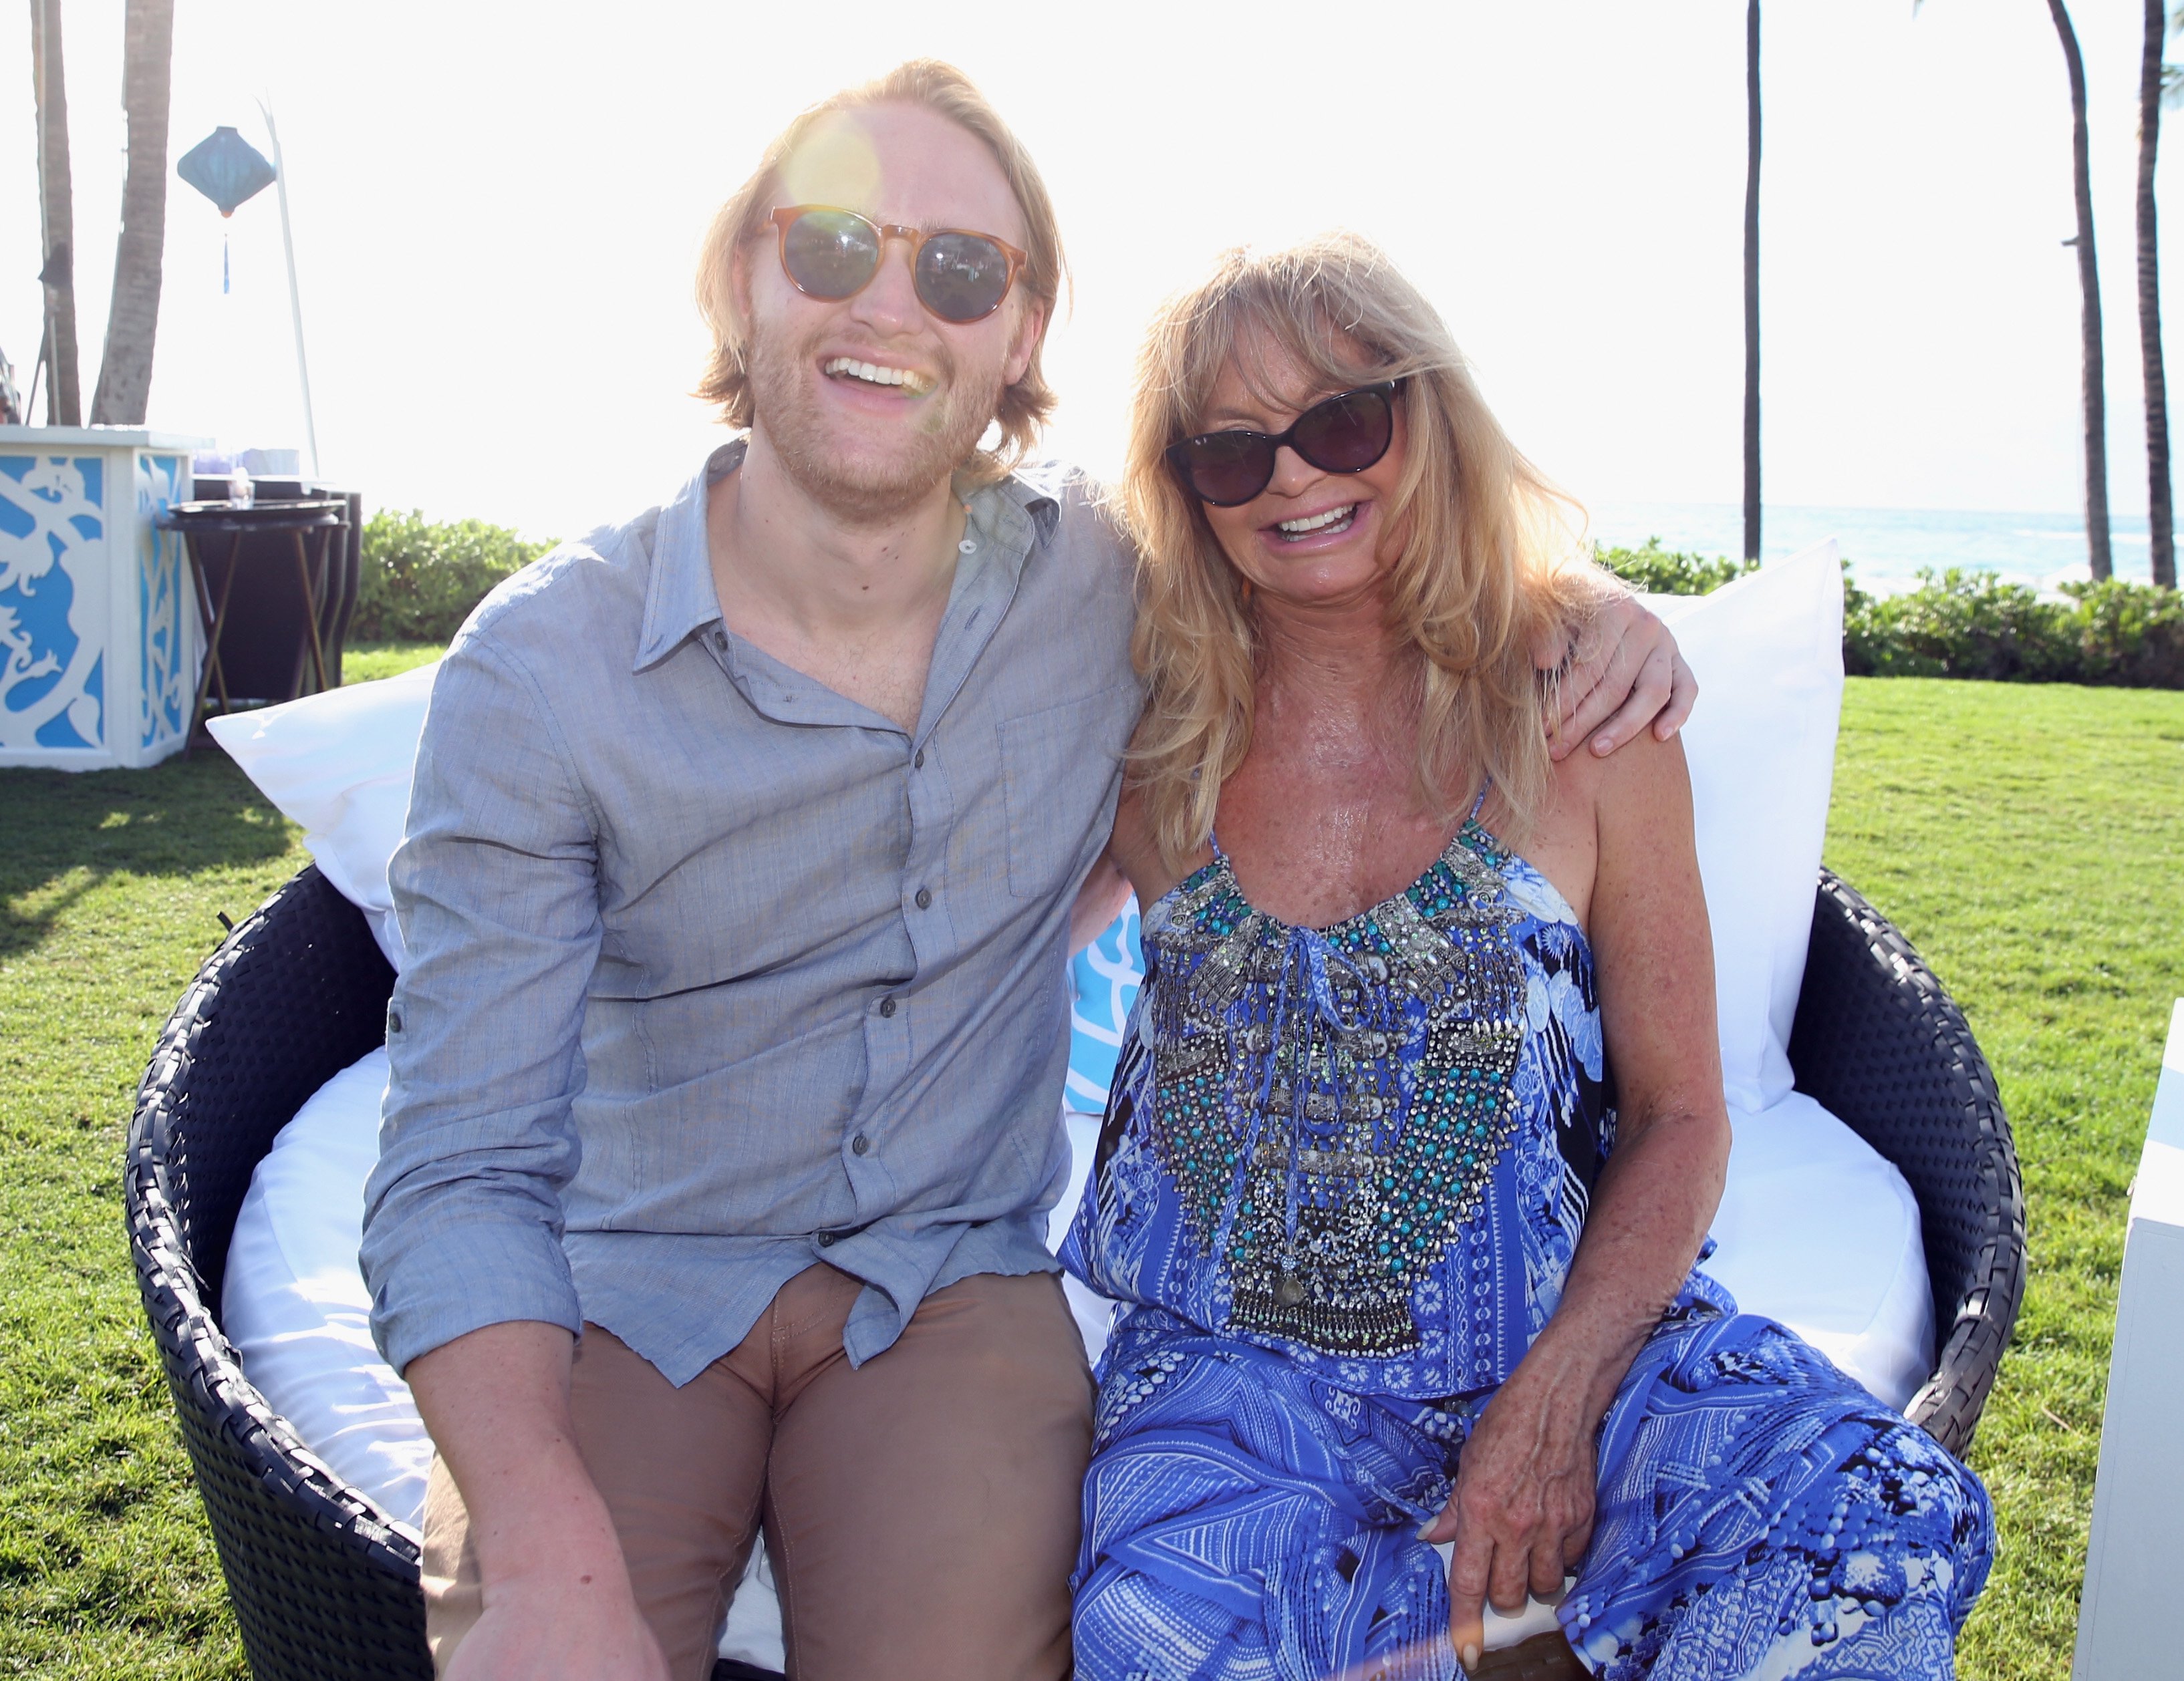 Wyatt Russell, recipient of the 2016 Maui Film Festival Rising Star Award in Wailea, and actress Goldie Hawn attend Maui Film Festival's Taste of Summer Opening Night Celebration at Grand Wailea on June 15, 2016 in Wailea, Hawaii | Source: Getty Images 